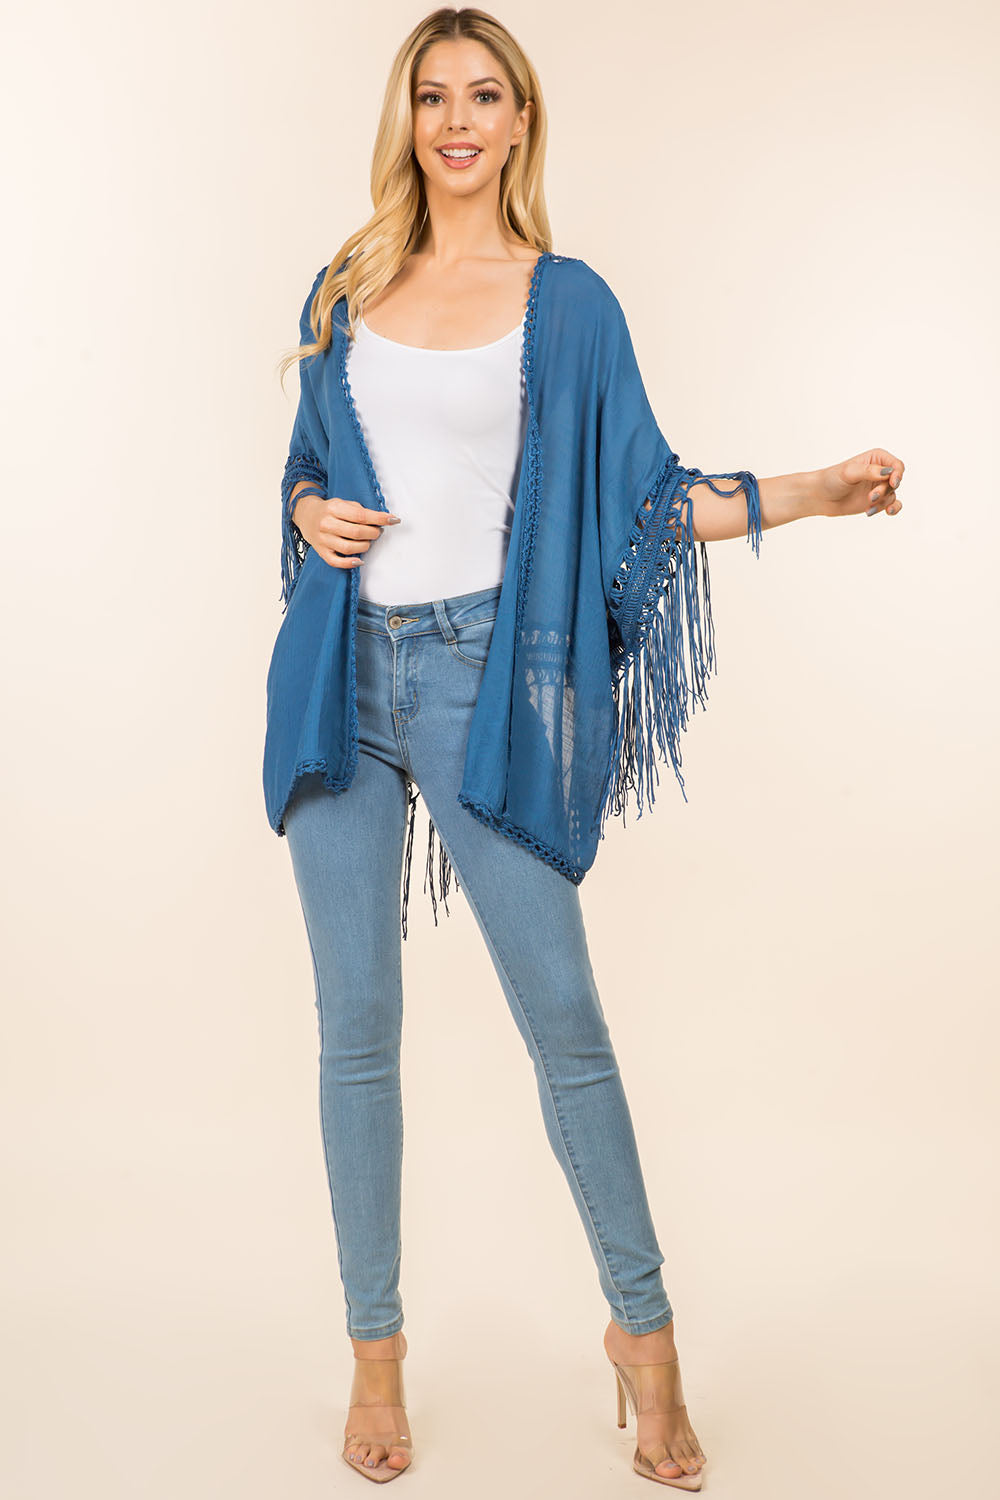 KP-4142 solid color kimono with crochet detail back design